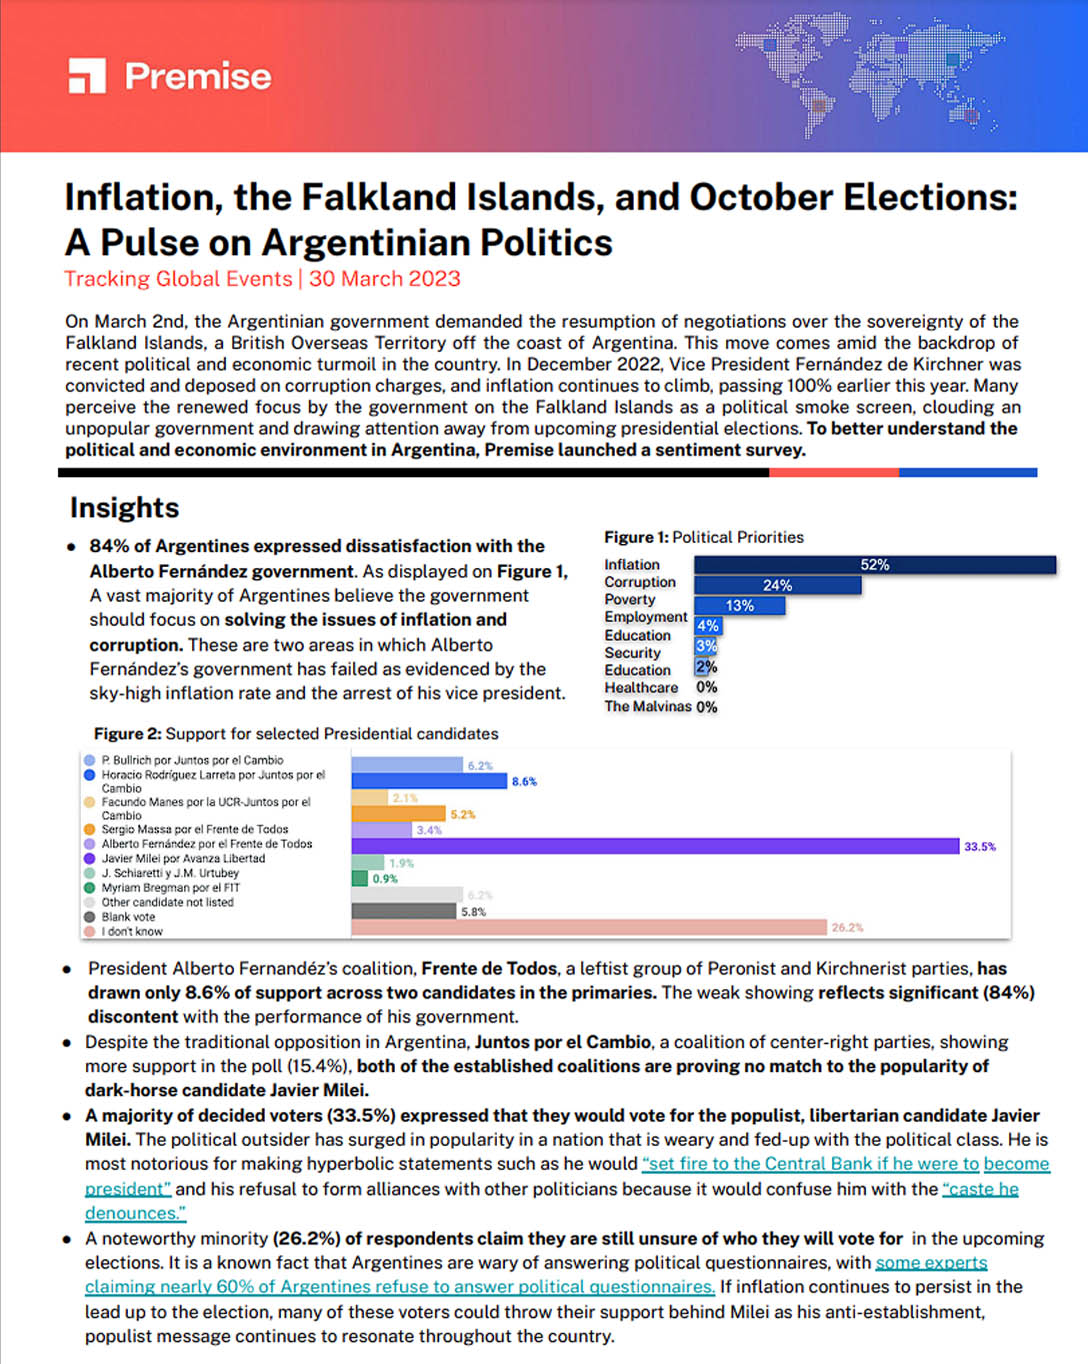 Inflation, the Falkland Islands, and October Elections: A Pulse on Argentinian Politics